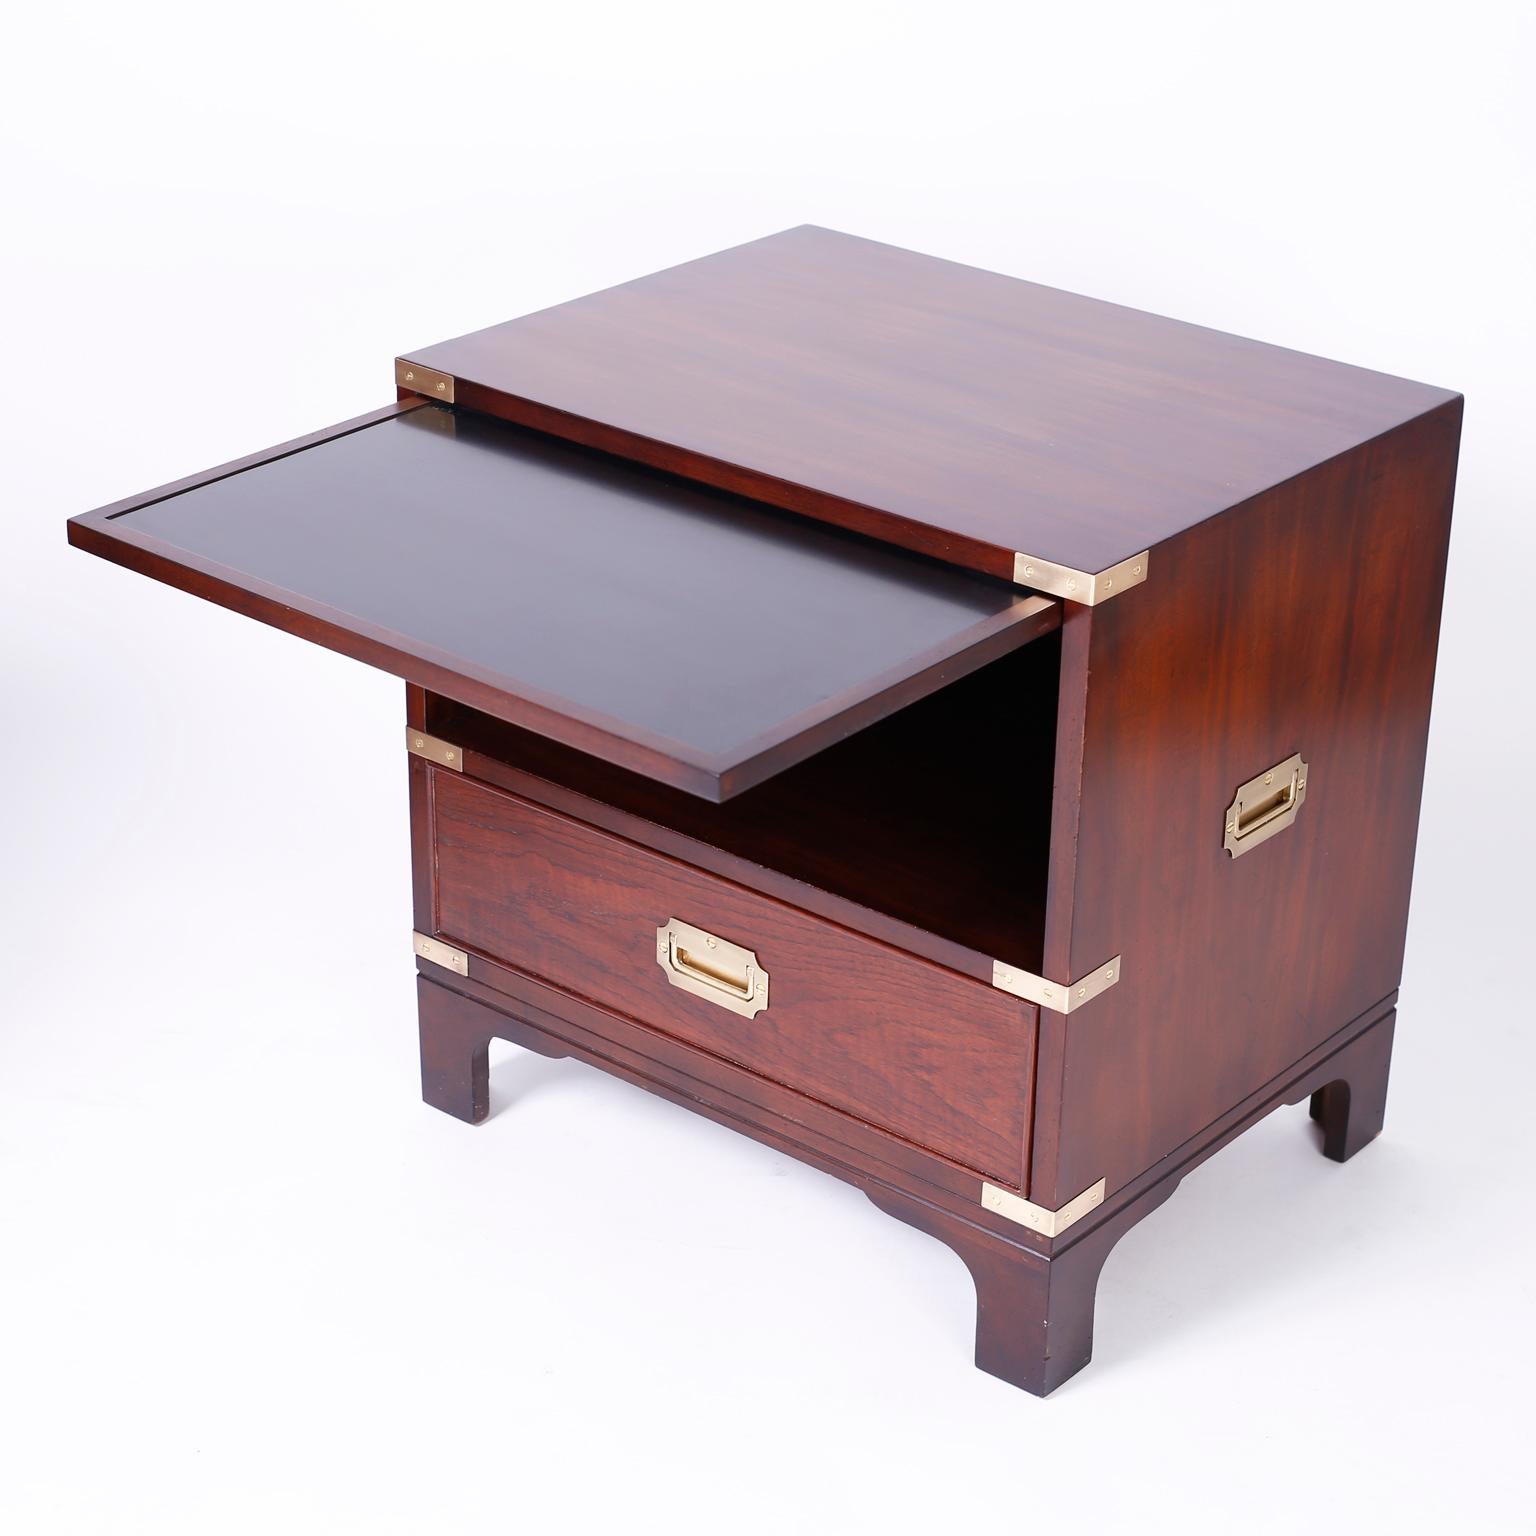 20th Century Pair of Midcentury Campaign Style Nightstands